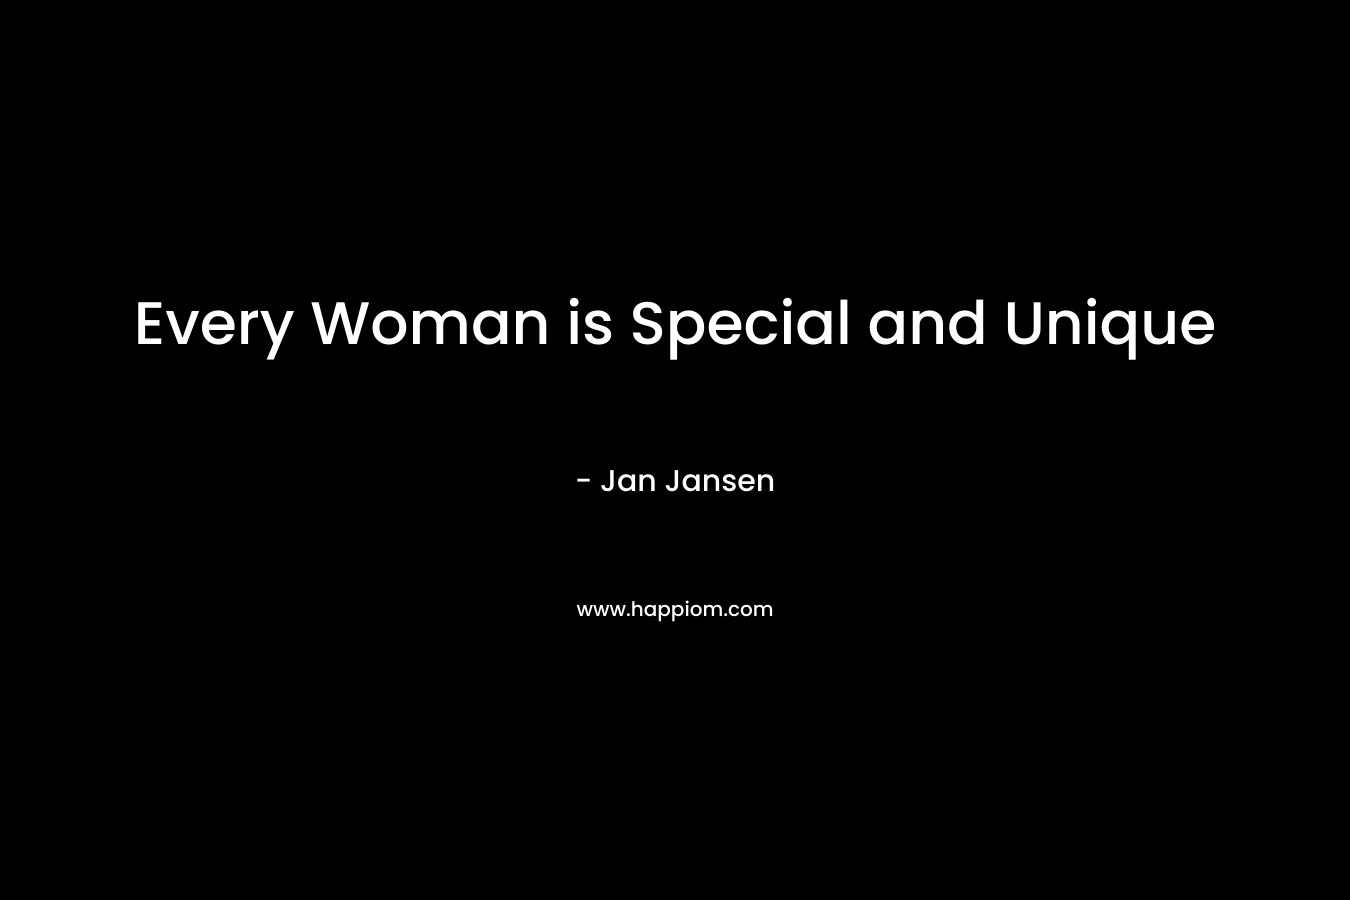 Every Woman is Special and Unique